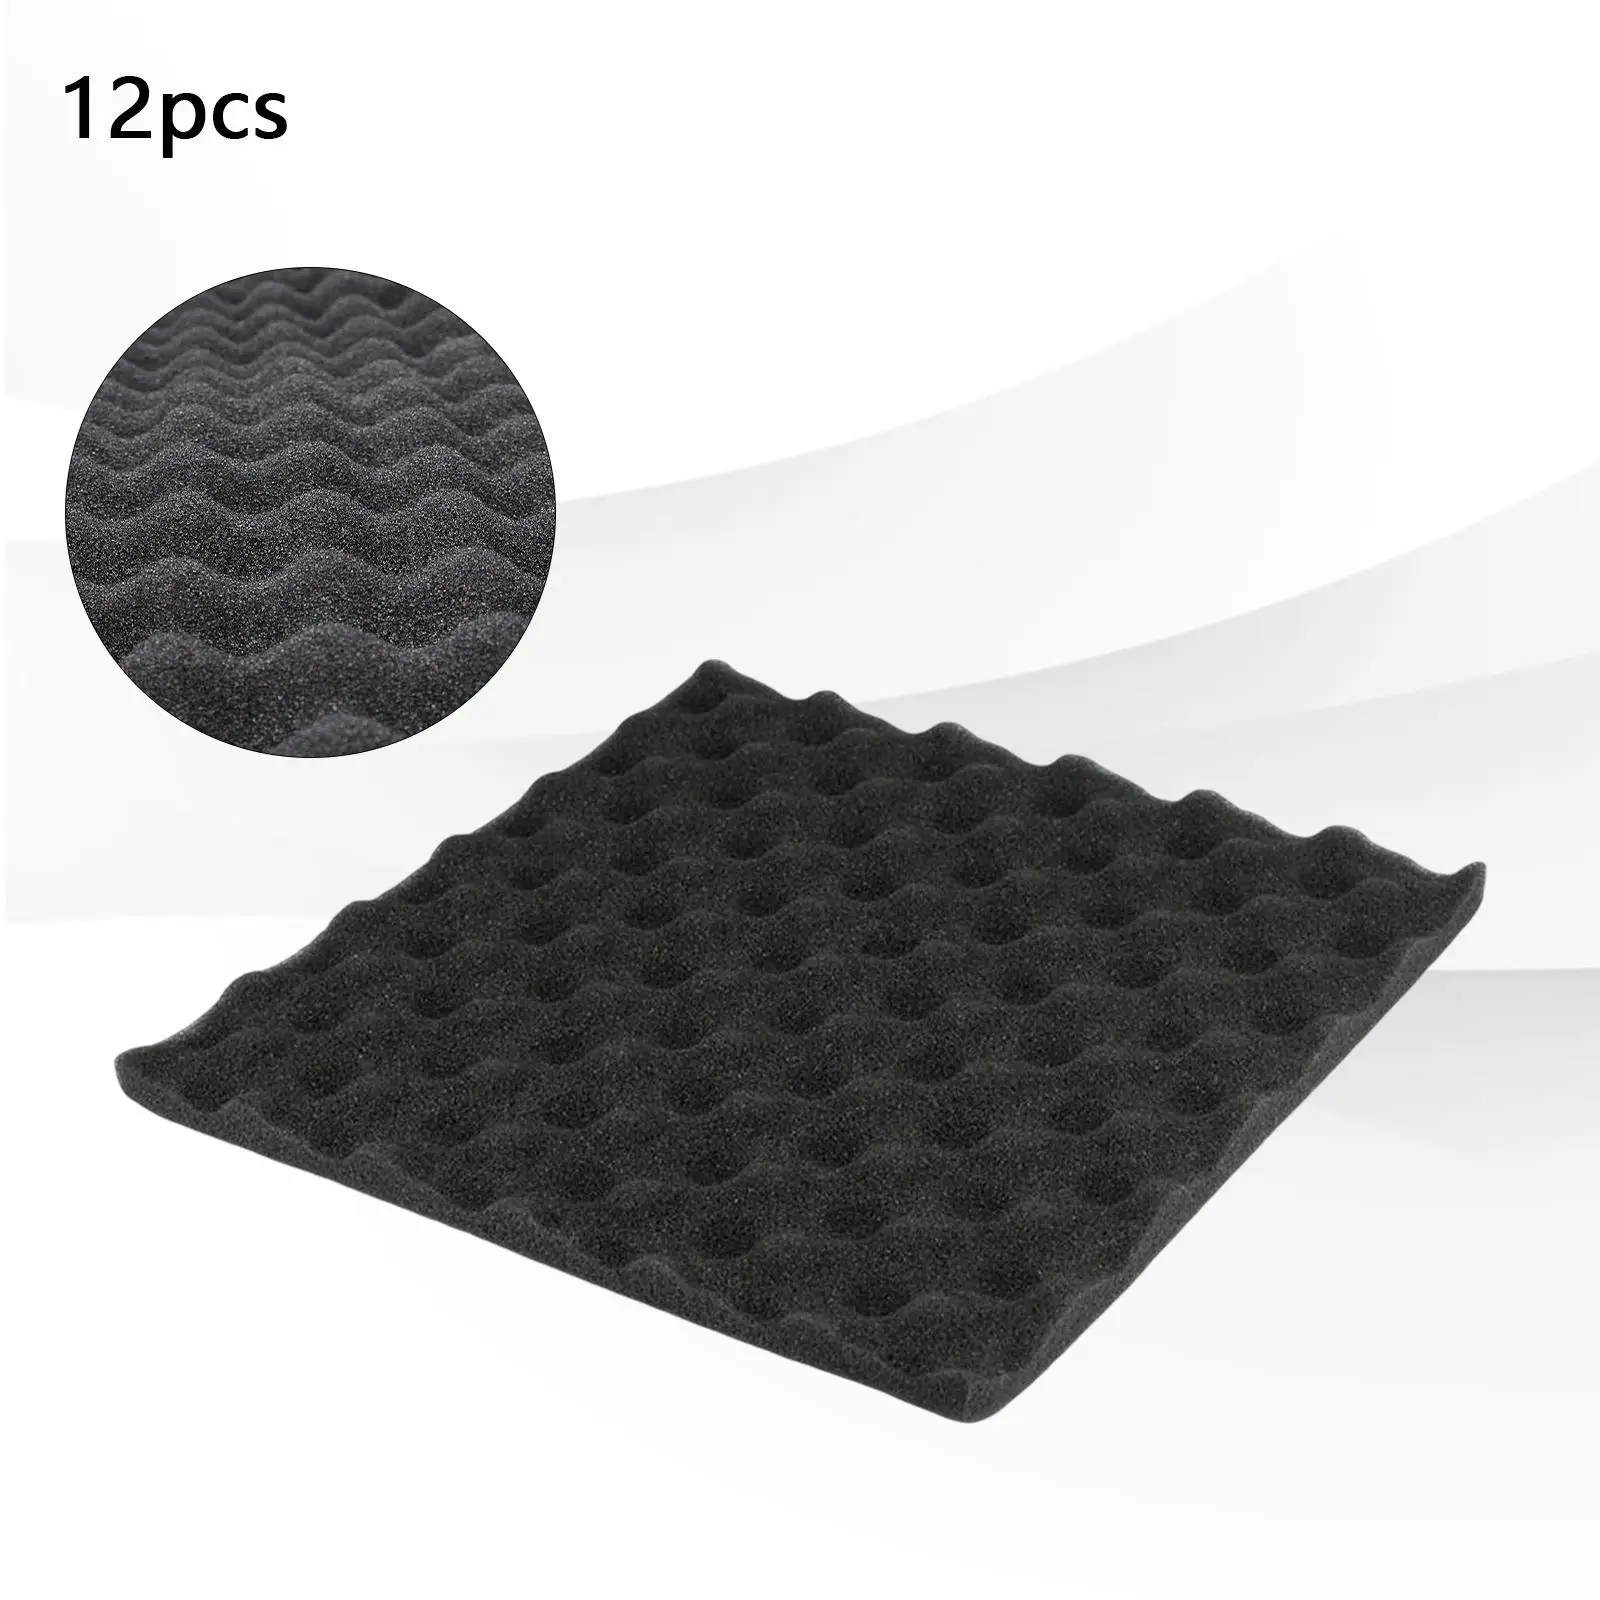 12 Pieces Soundproofing Acoustic Foam Panels Sound Panels Wedges for Home